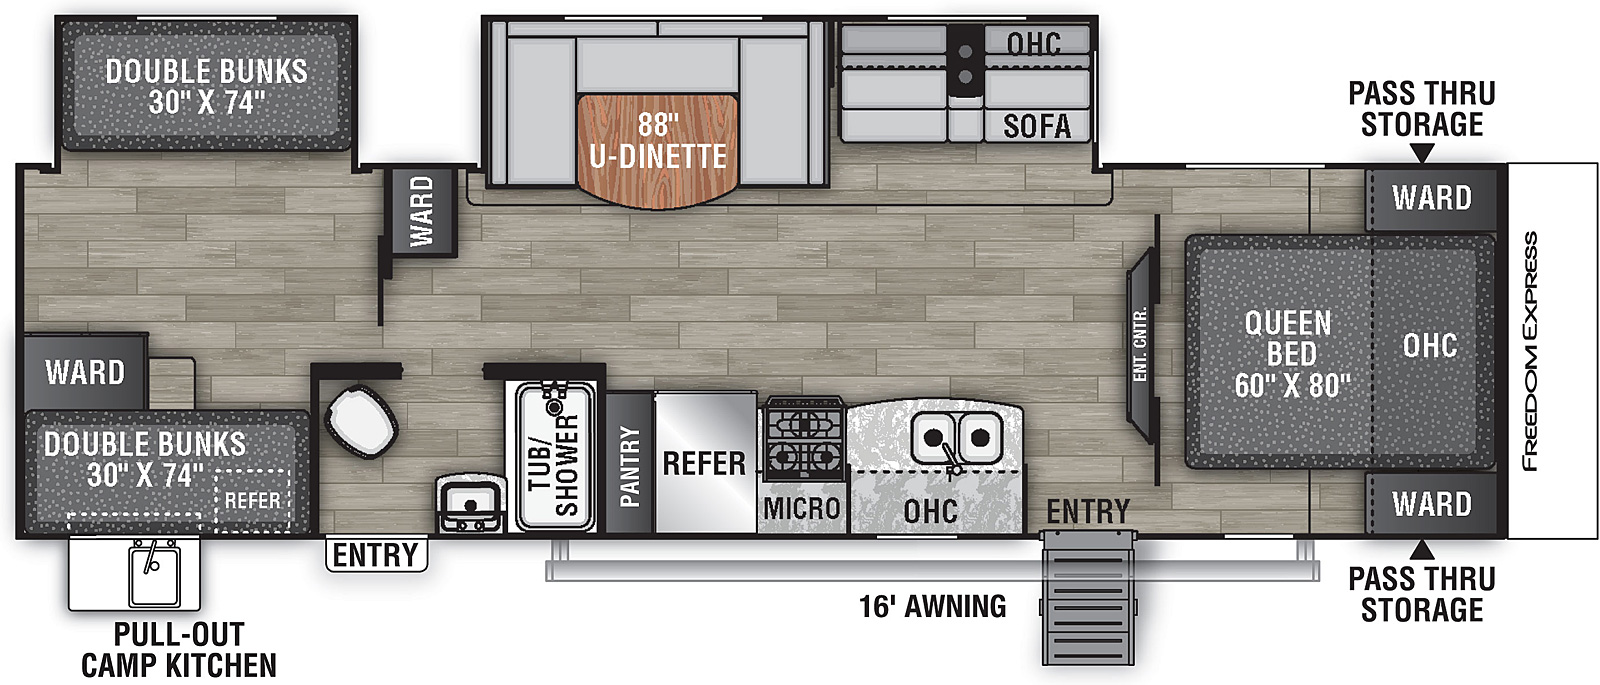 The floor plan of the Coachmen Freedom Express Select 31SE